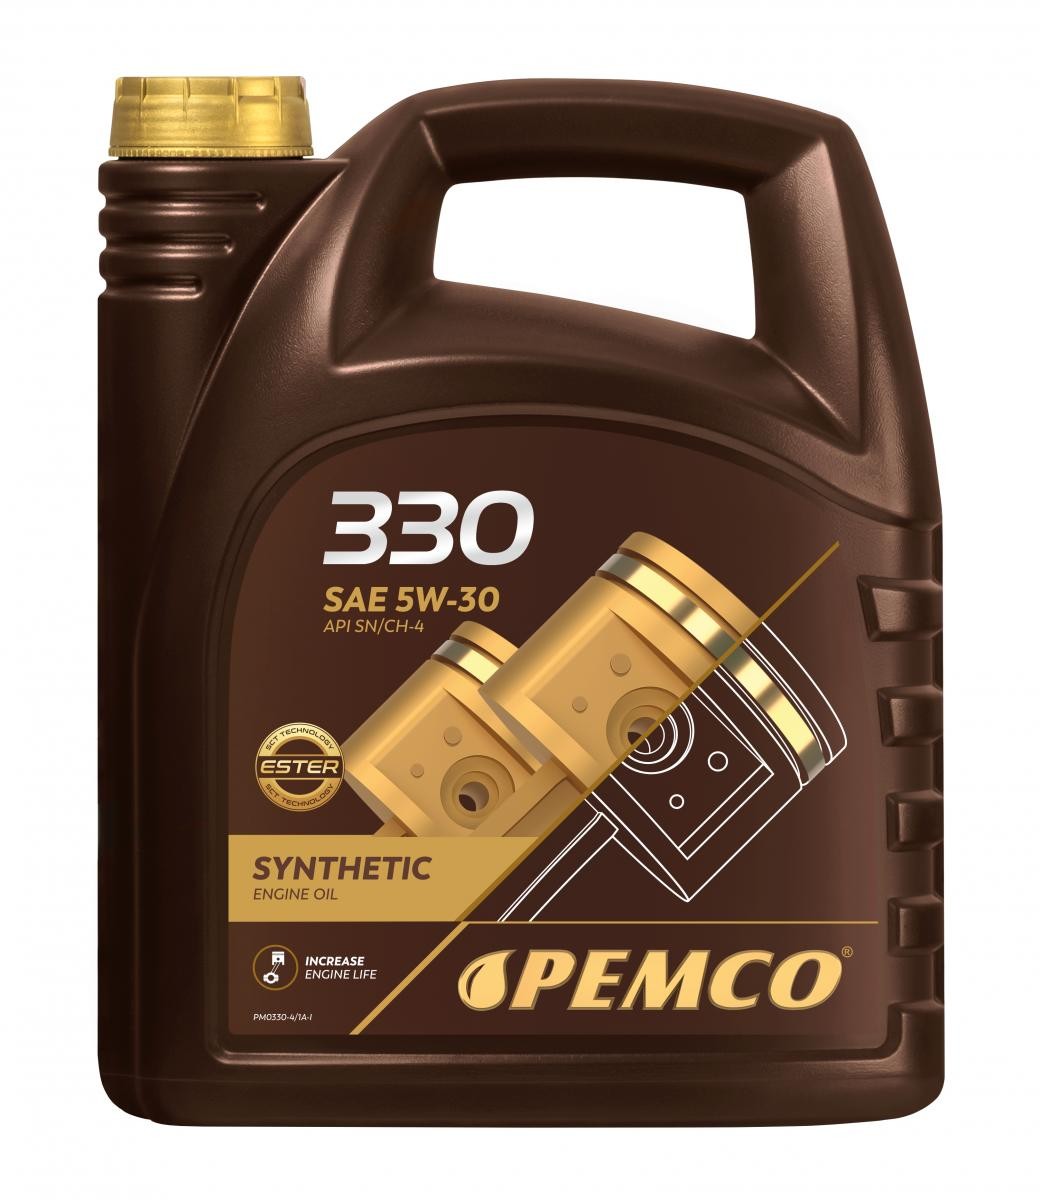 PEMCO PM0330-4 Engine oil VW experience and price